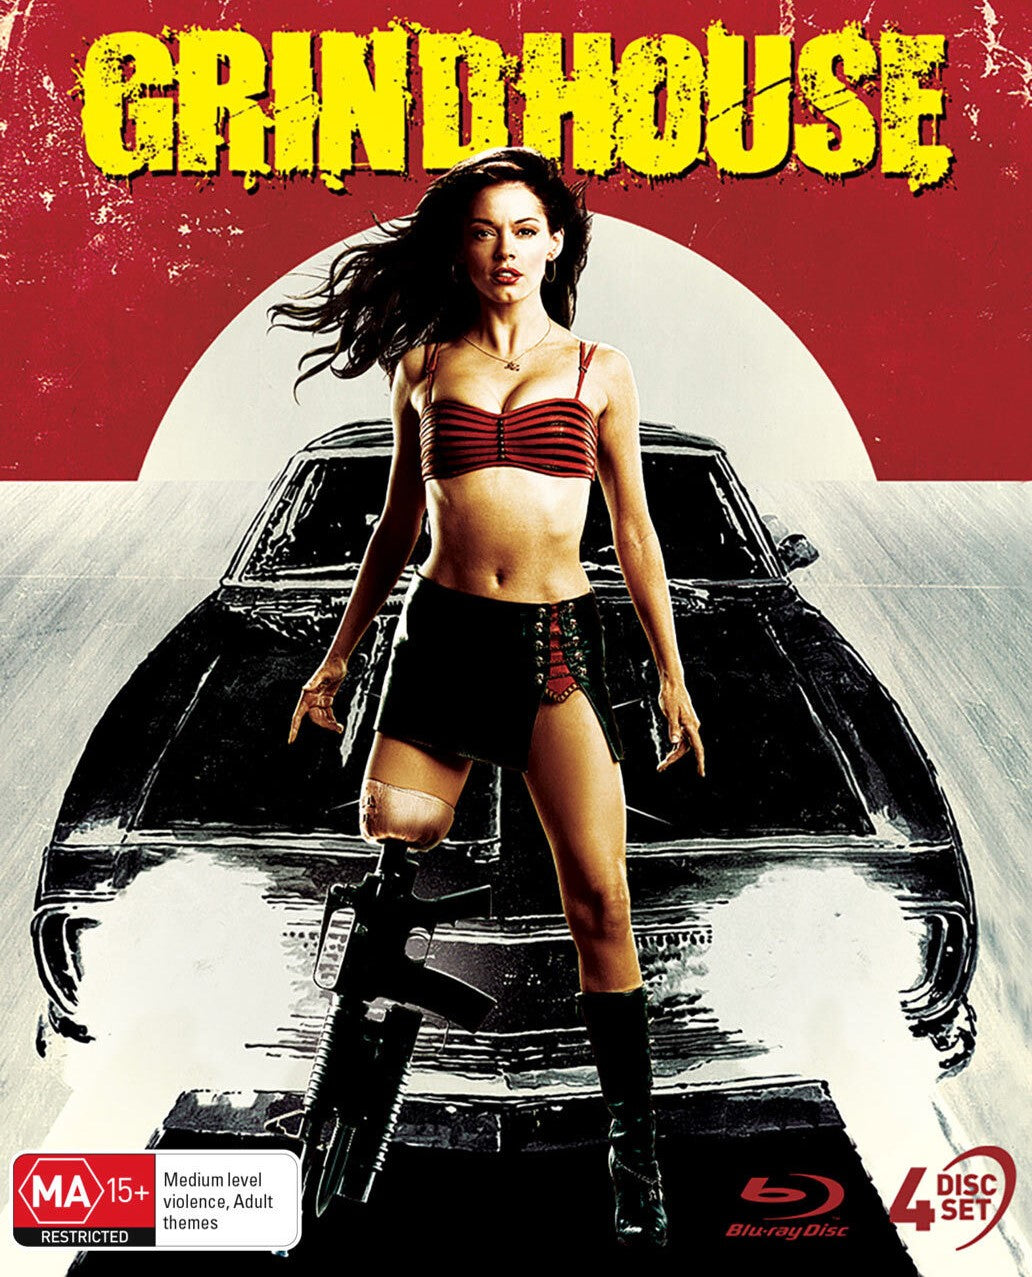 GRINDHOUSE (REGION FREE IMPORT) BLU-RAY